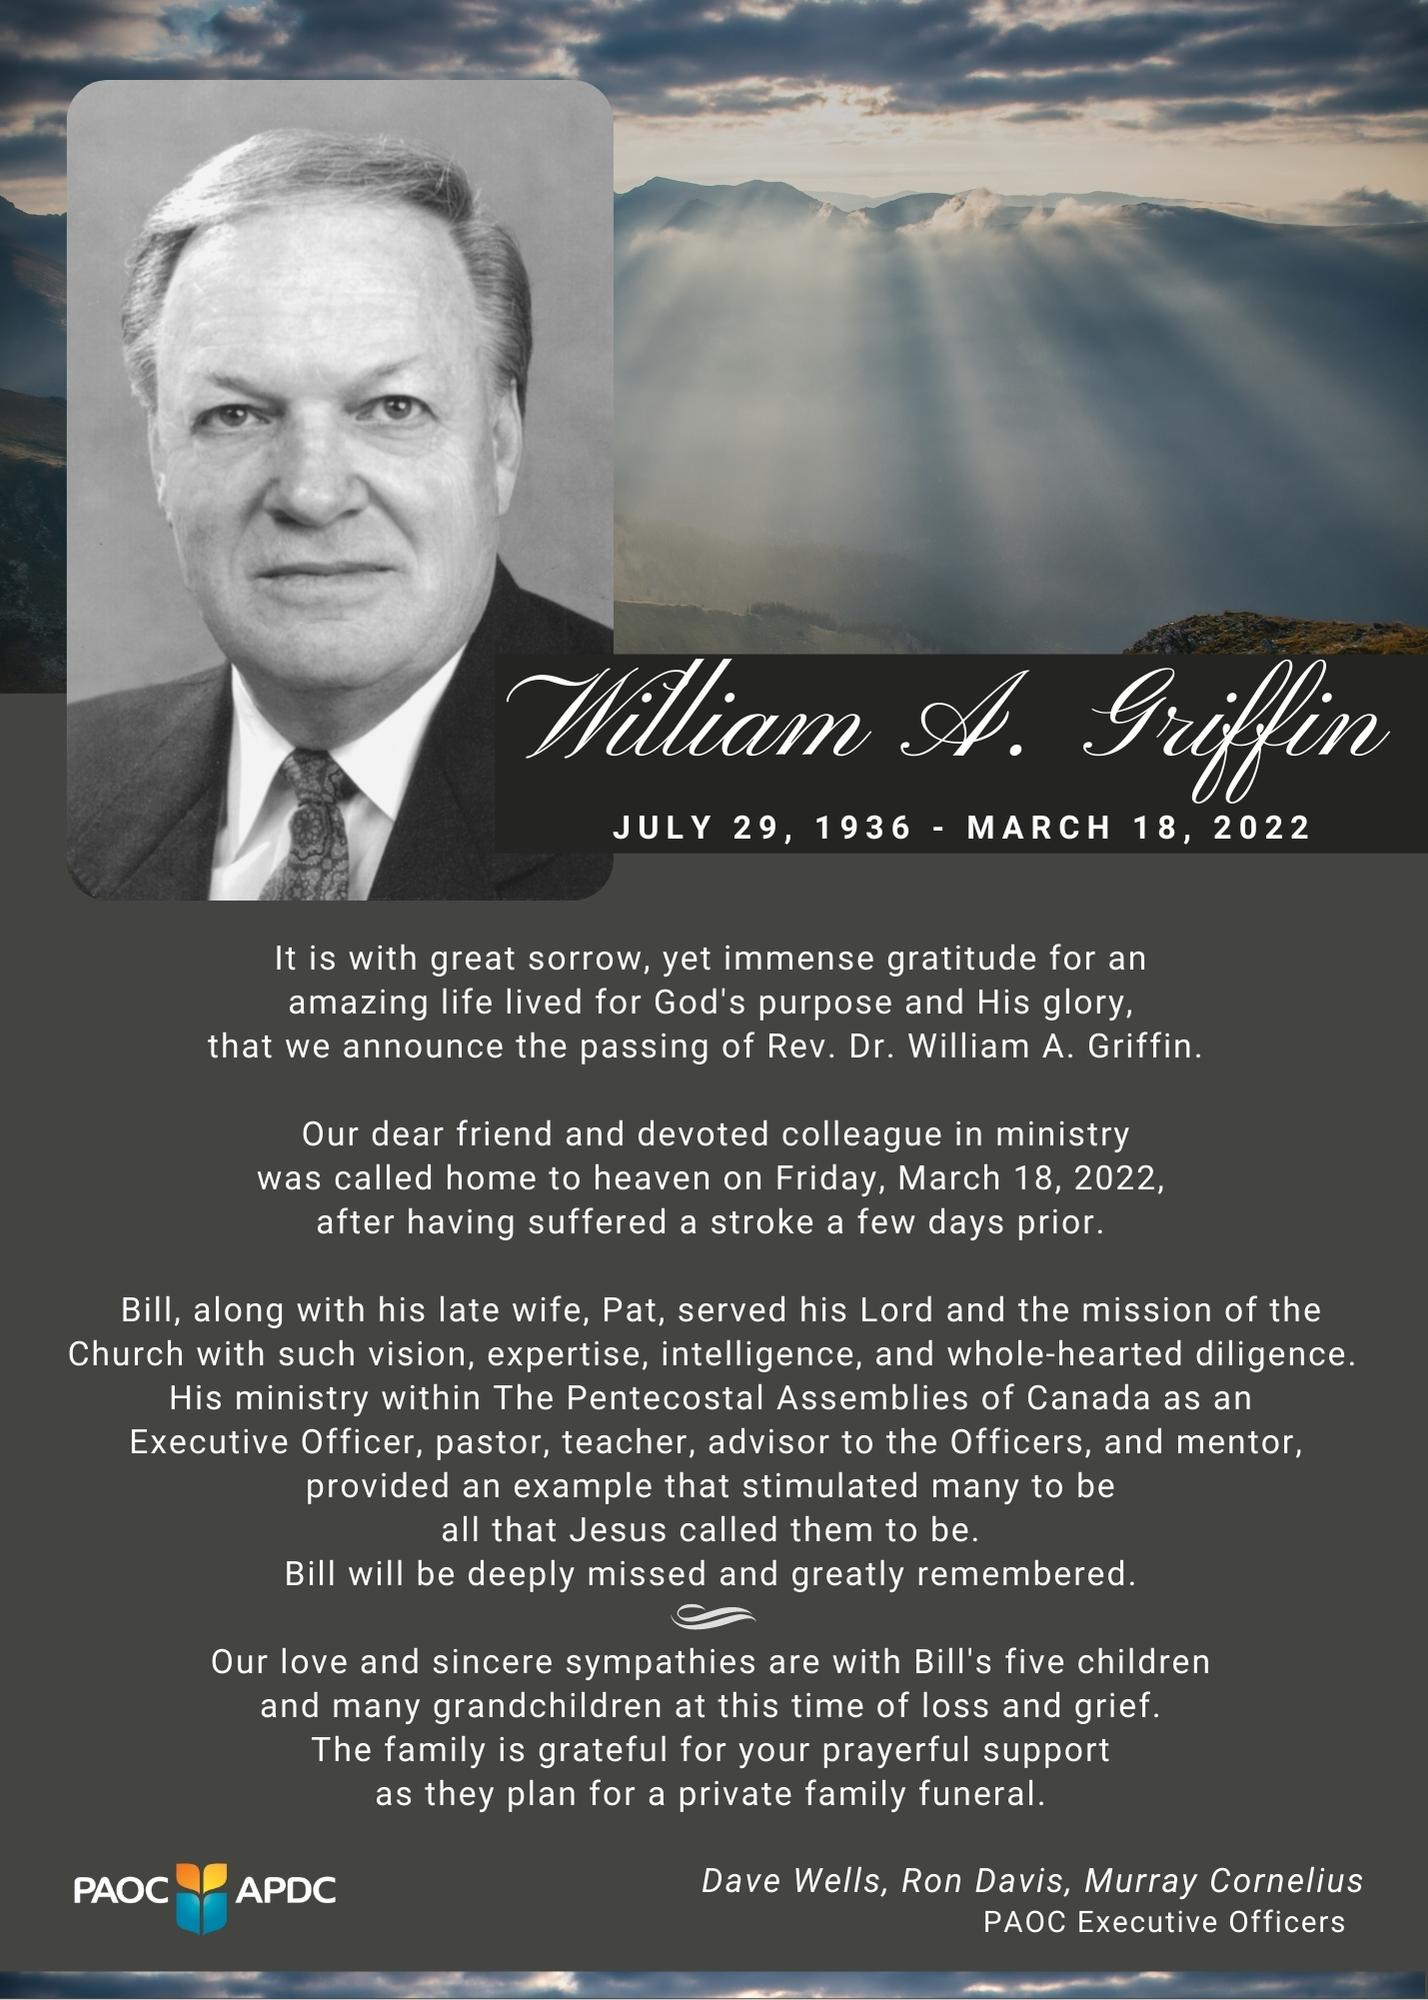 Full announcement of The Passing of William A. Griffin, July 29 1936 - March 18 2022 